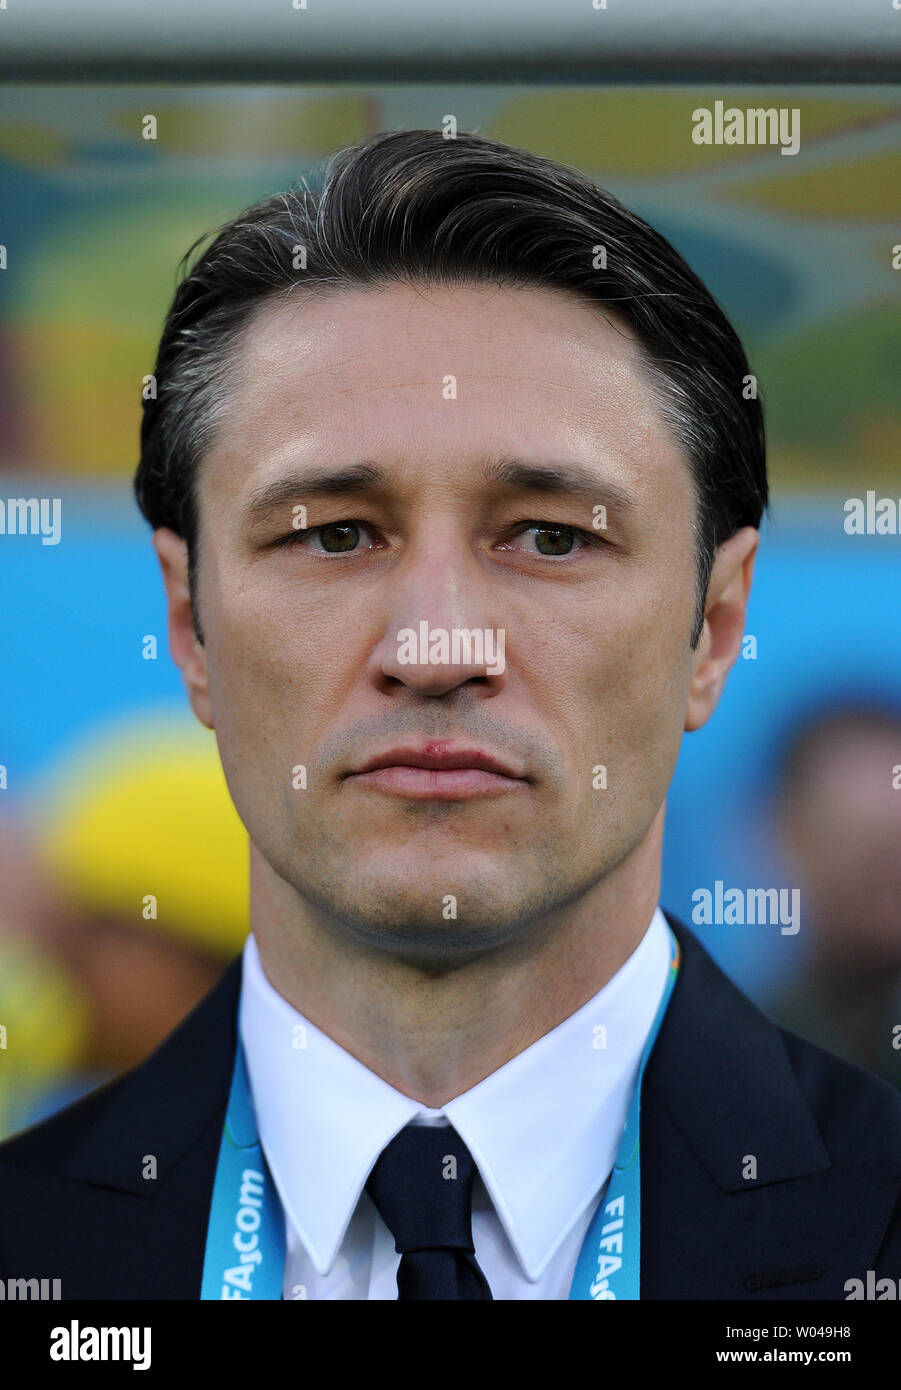 Croatia coach Niko Kovac looks on during the 2014 FIFA World Cup Group A  match at the Arena Corinthians in Sao Paulo, Brazil on June 12, 2014.  UPI/Chris Brunskill Stock Photo - Alamy